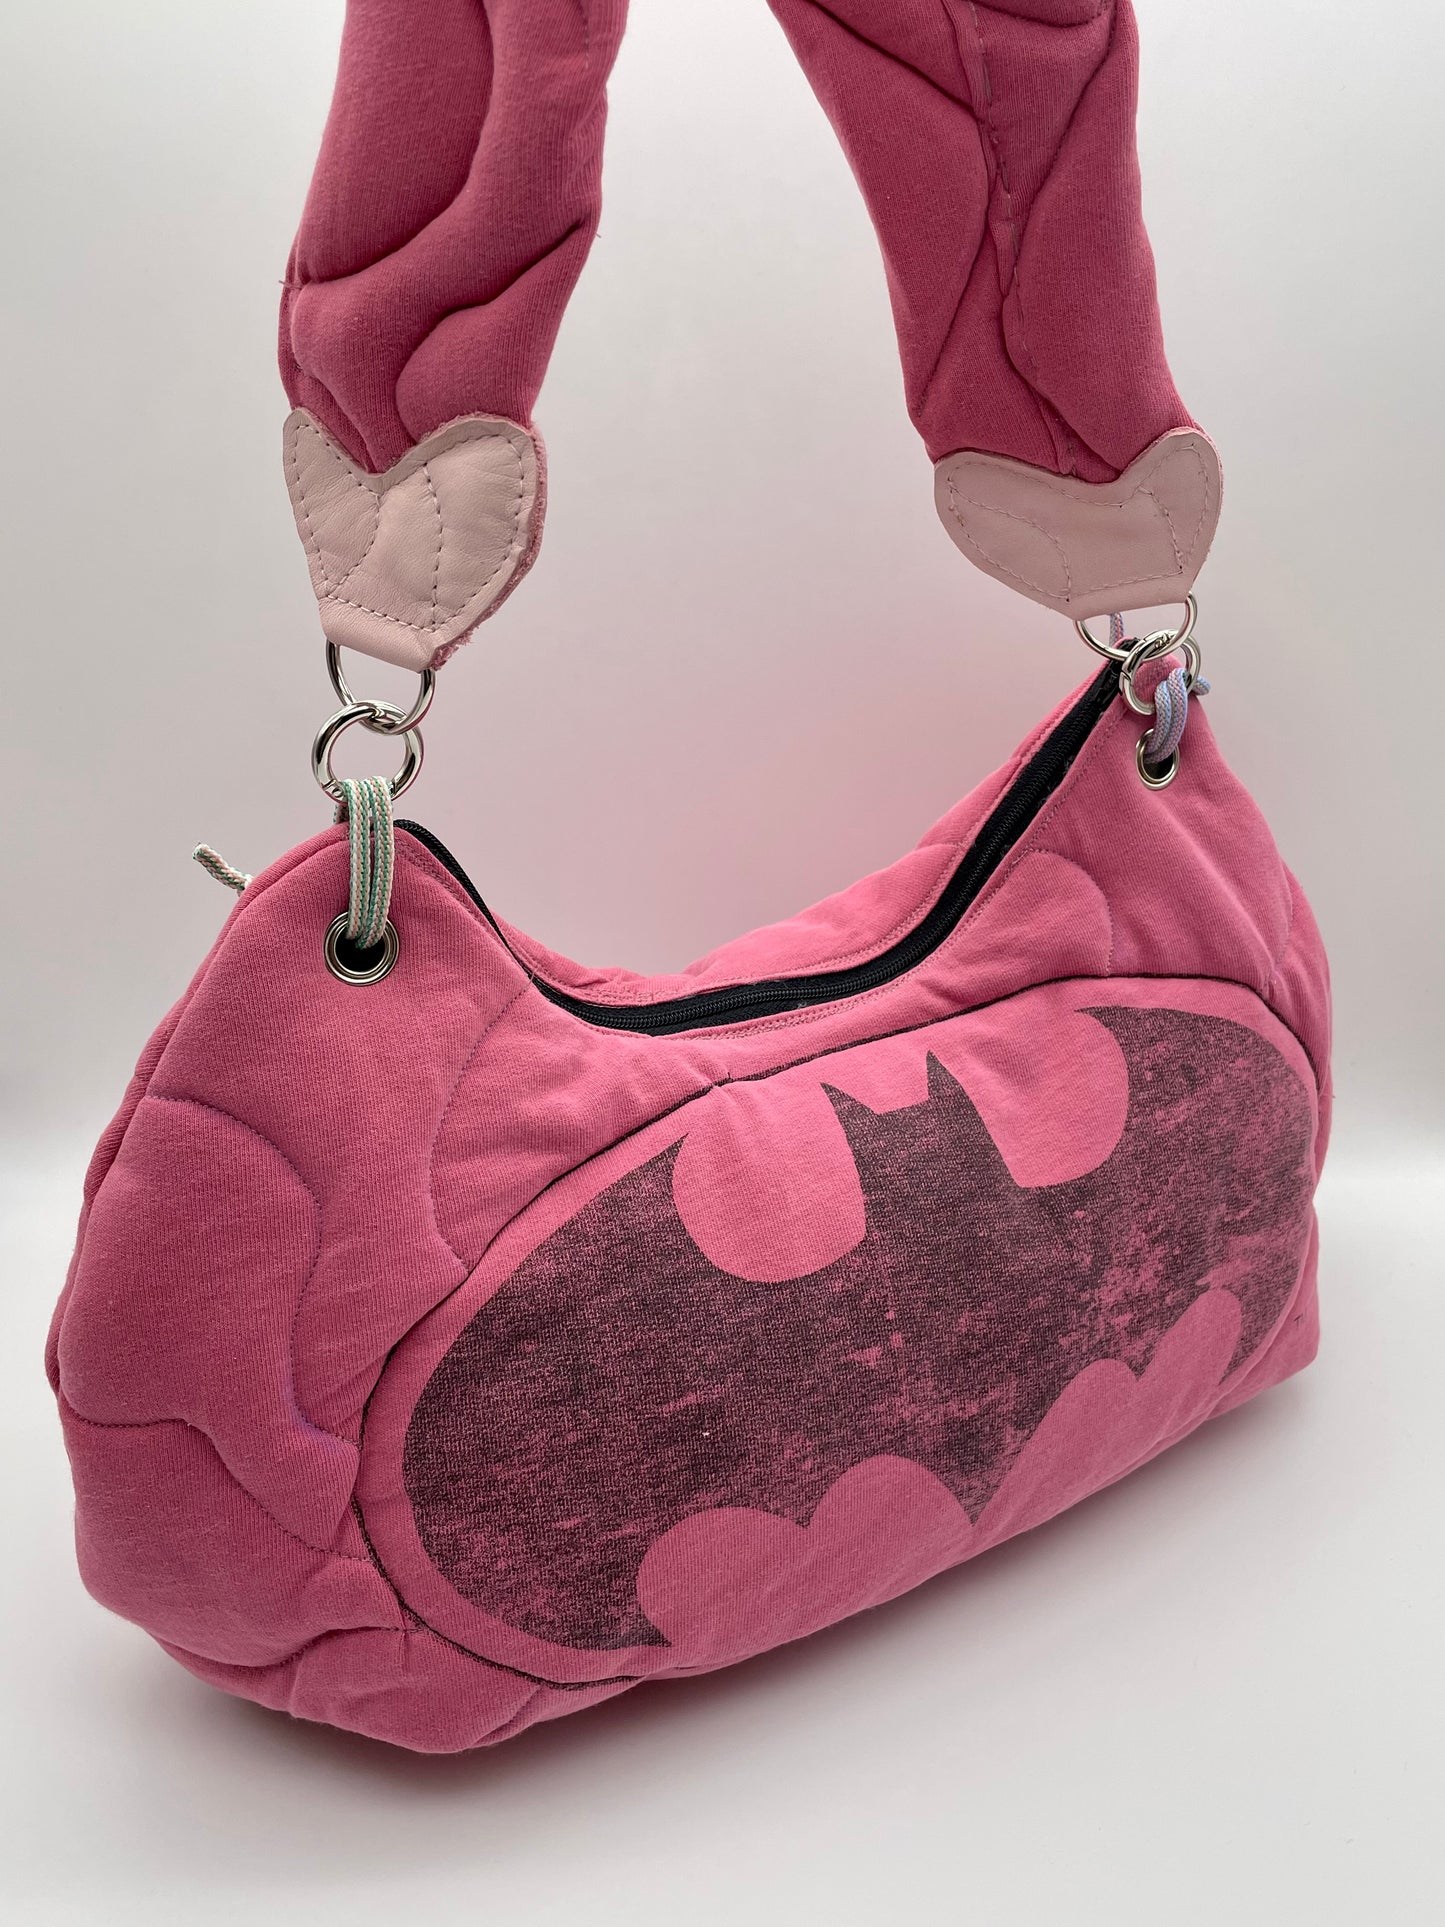 Strap leather pink wave padded bag curtains inlay upcycling bag reworked discarded clothes batman one of a kind handmade